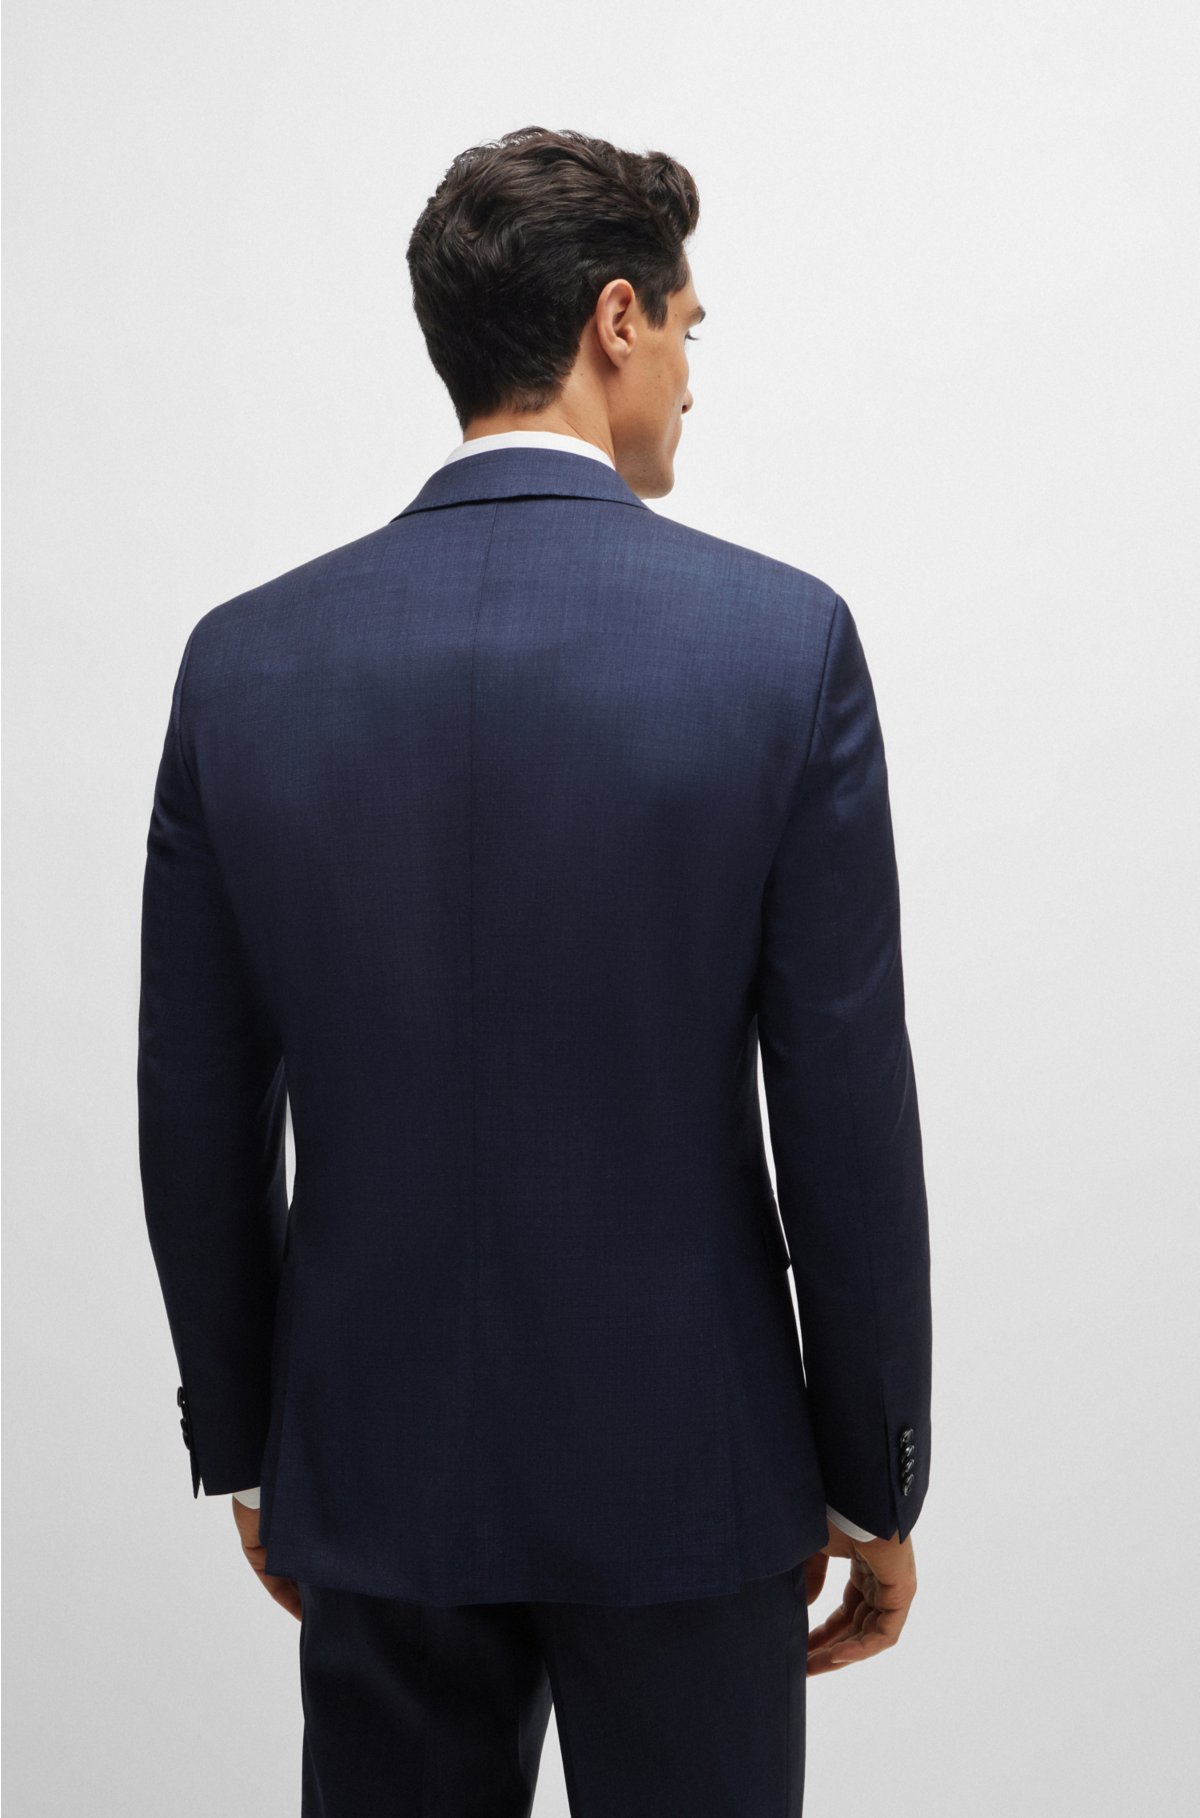 BOSS - Three-piece slim-fit suit in patterned stretch wool